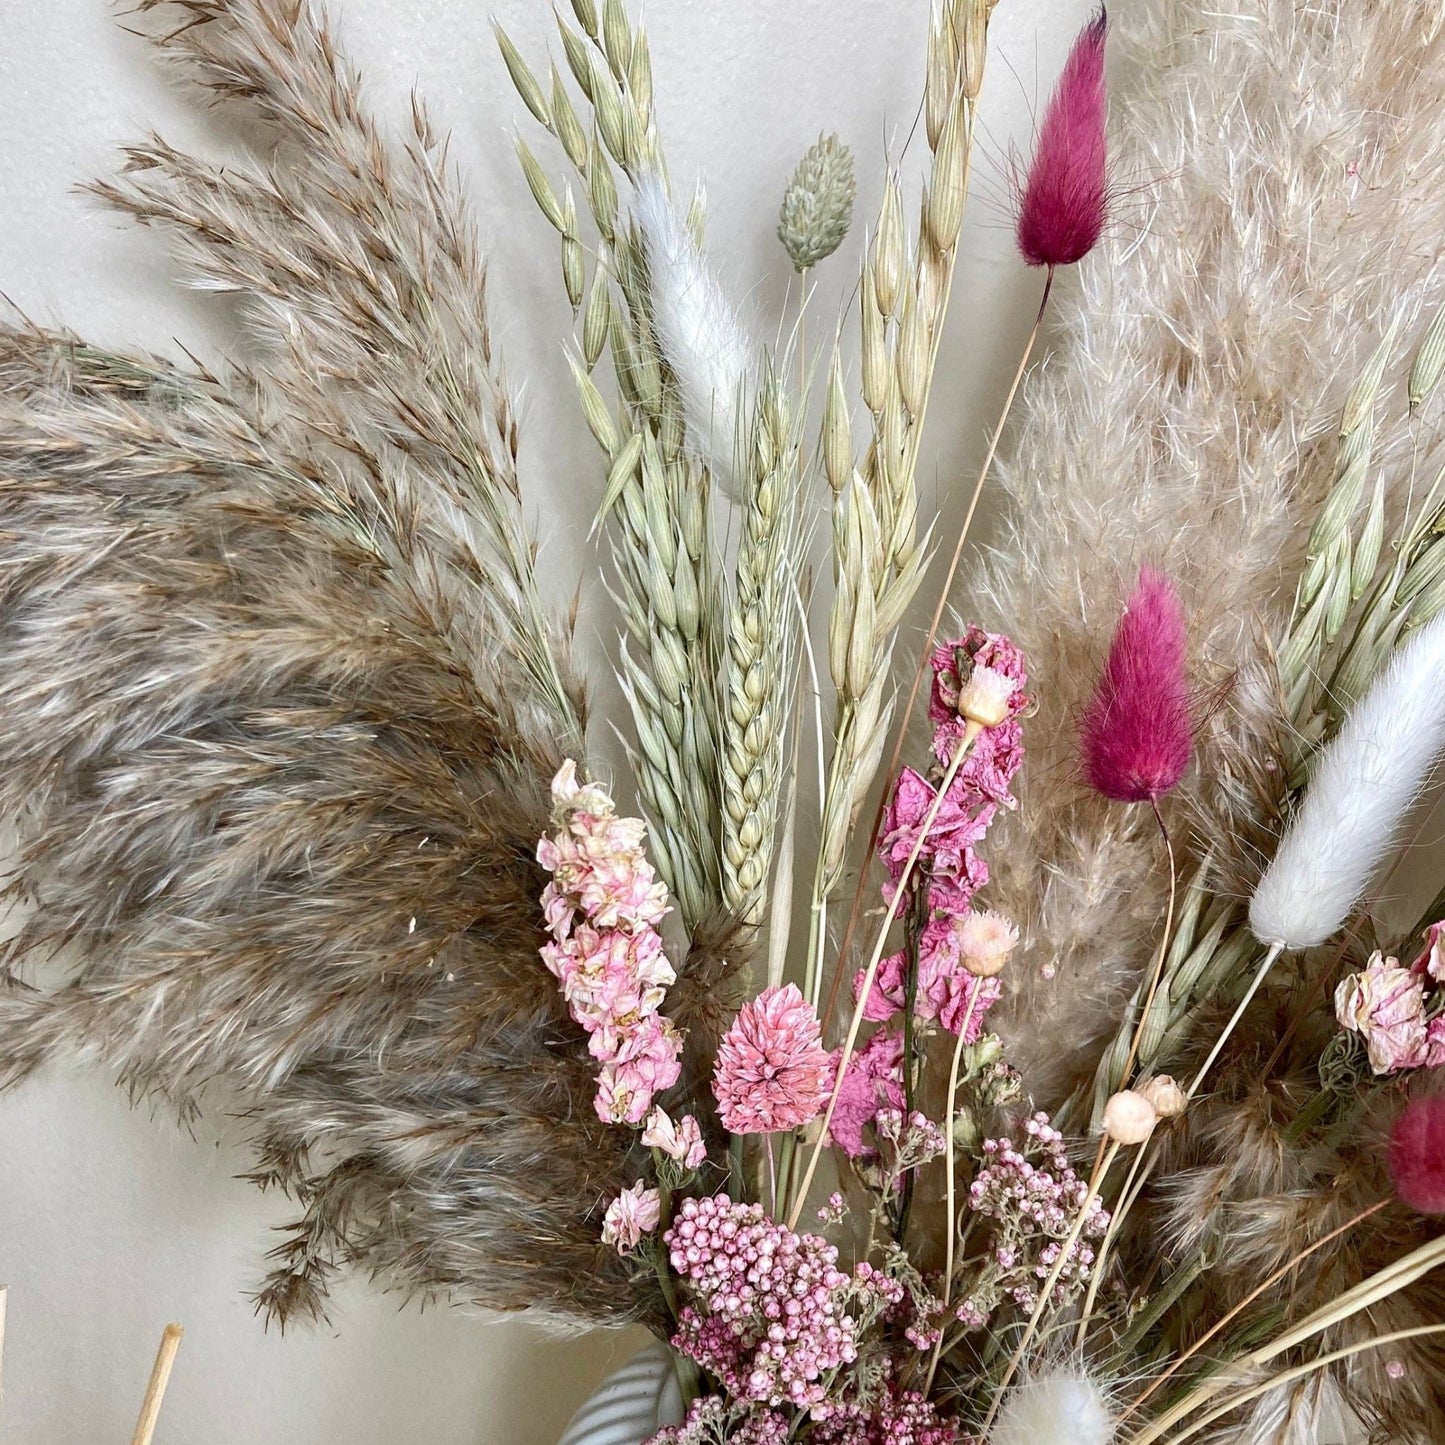 Pampas bouquet with Pink Dried Flowers - 60cm - Norfolk Pampas